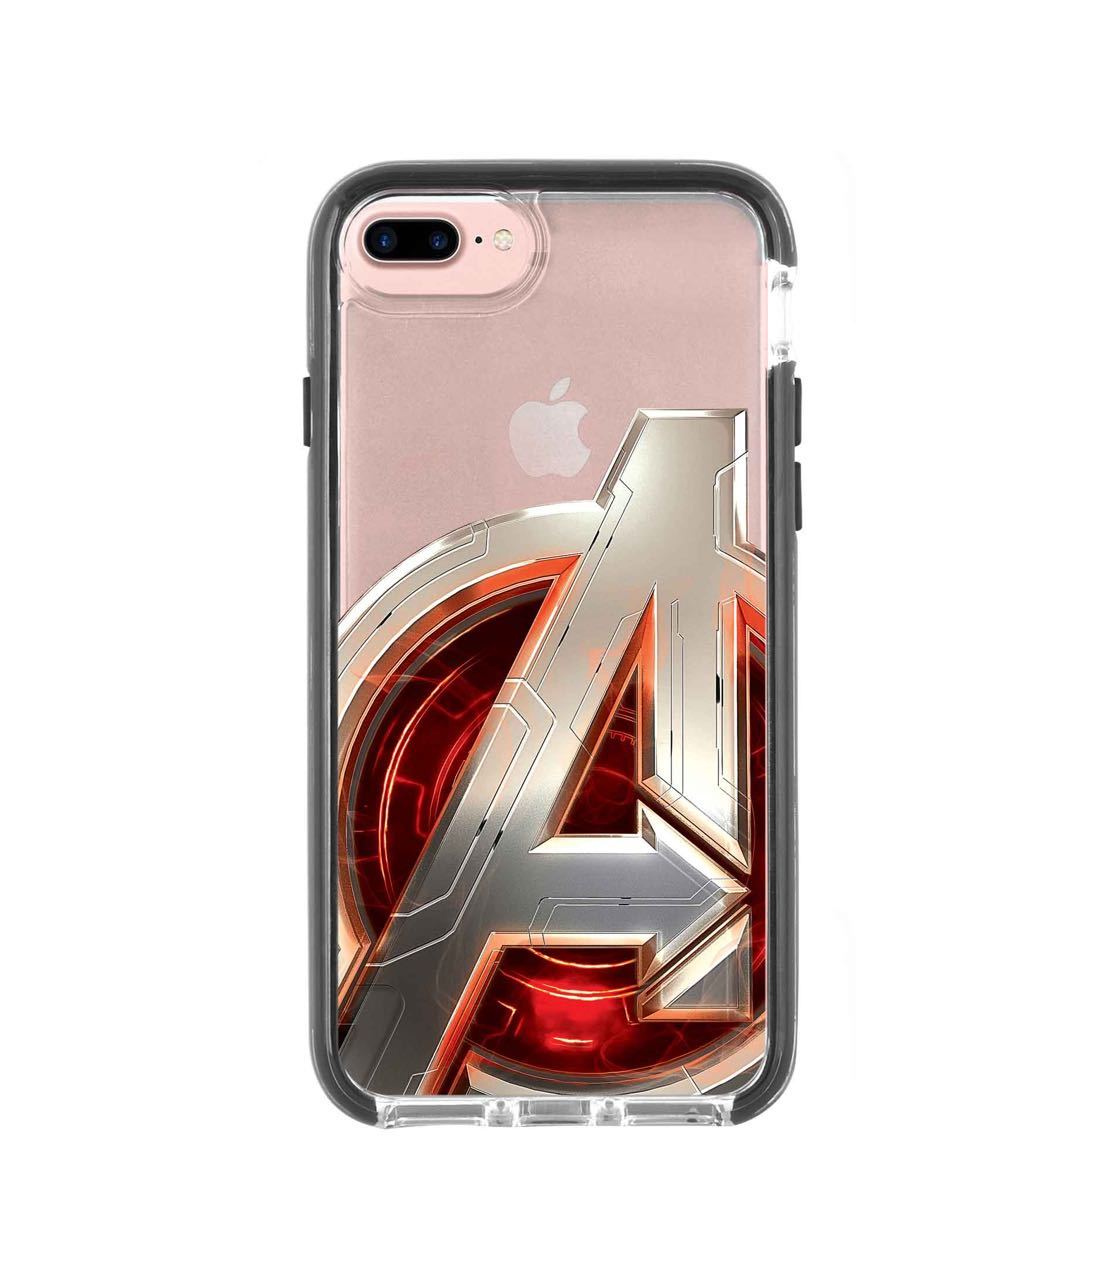 Avengers Version 2 - Extreme Phone Case for iPhone 7 Plus